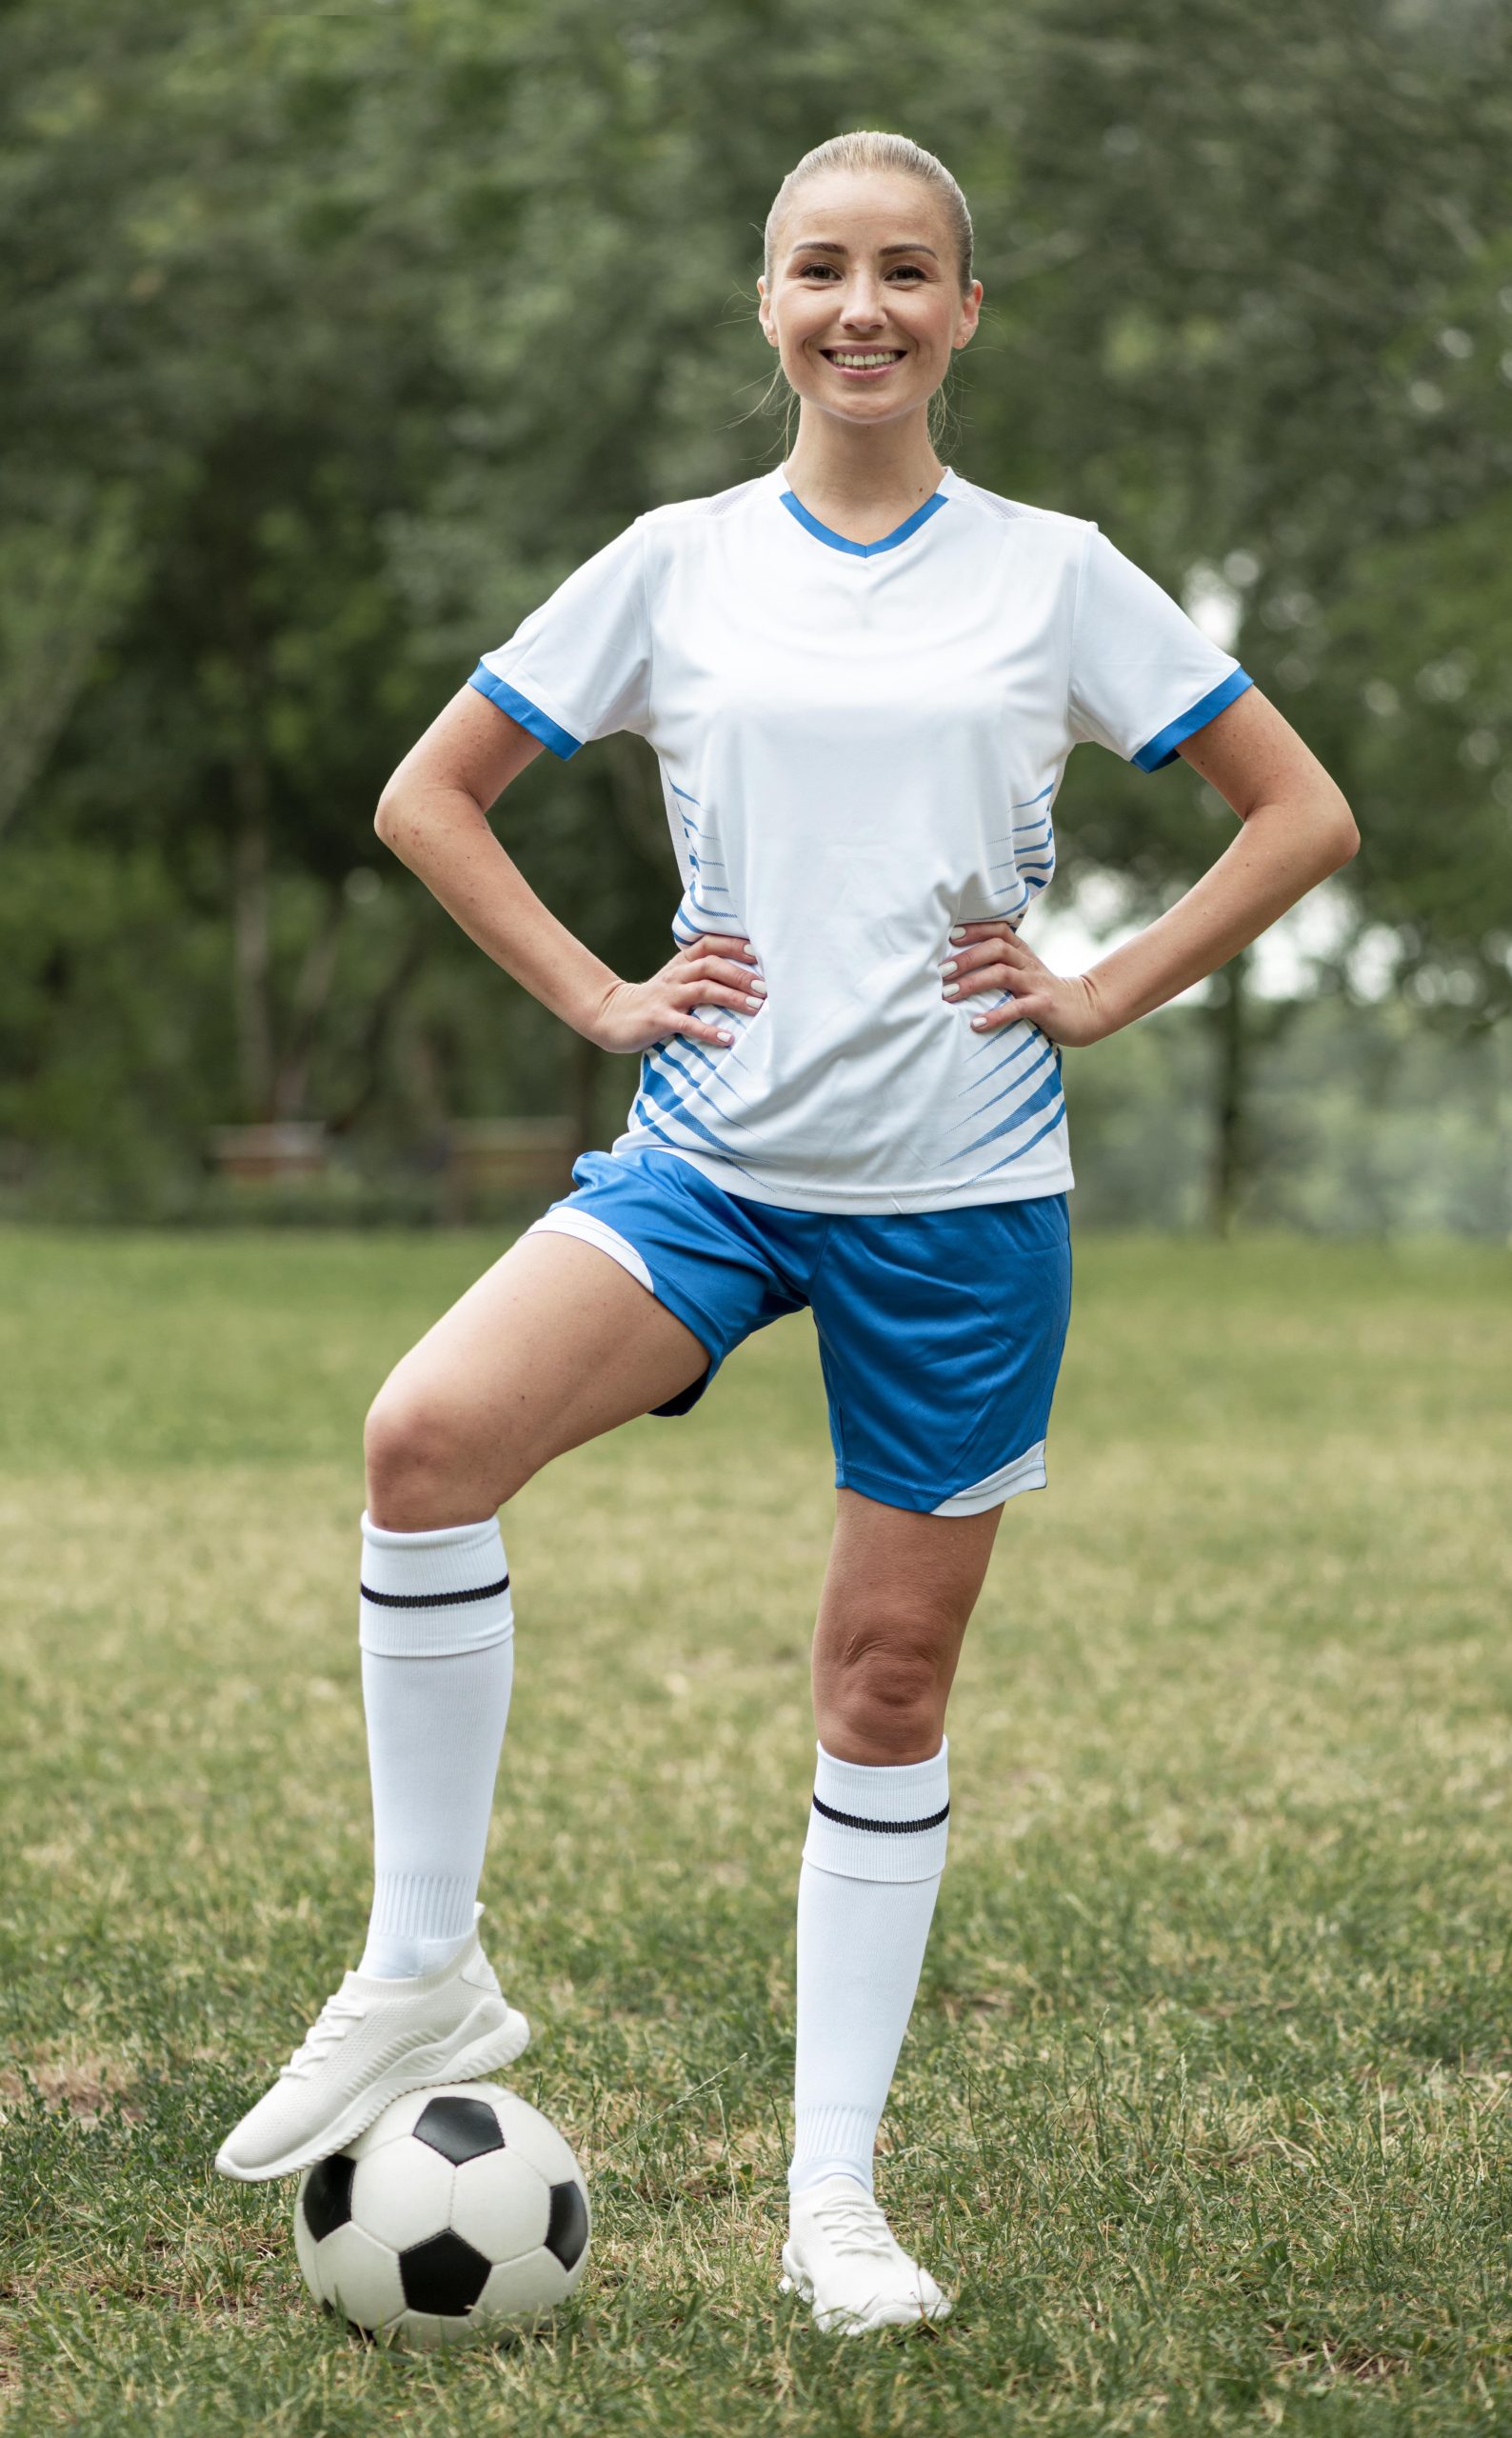 Making professional videos for women soccer players scaled